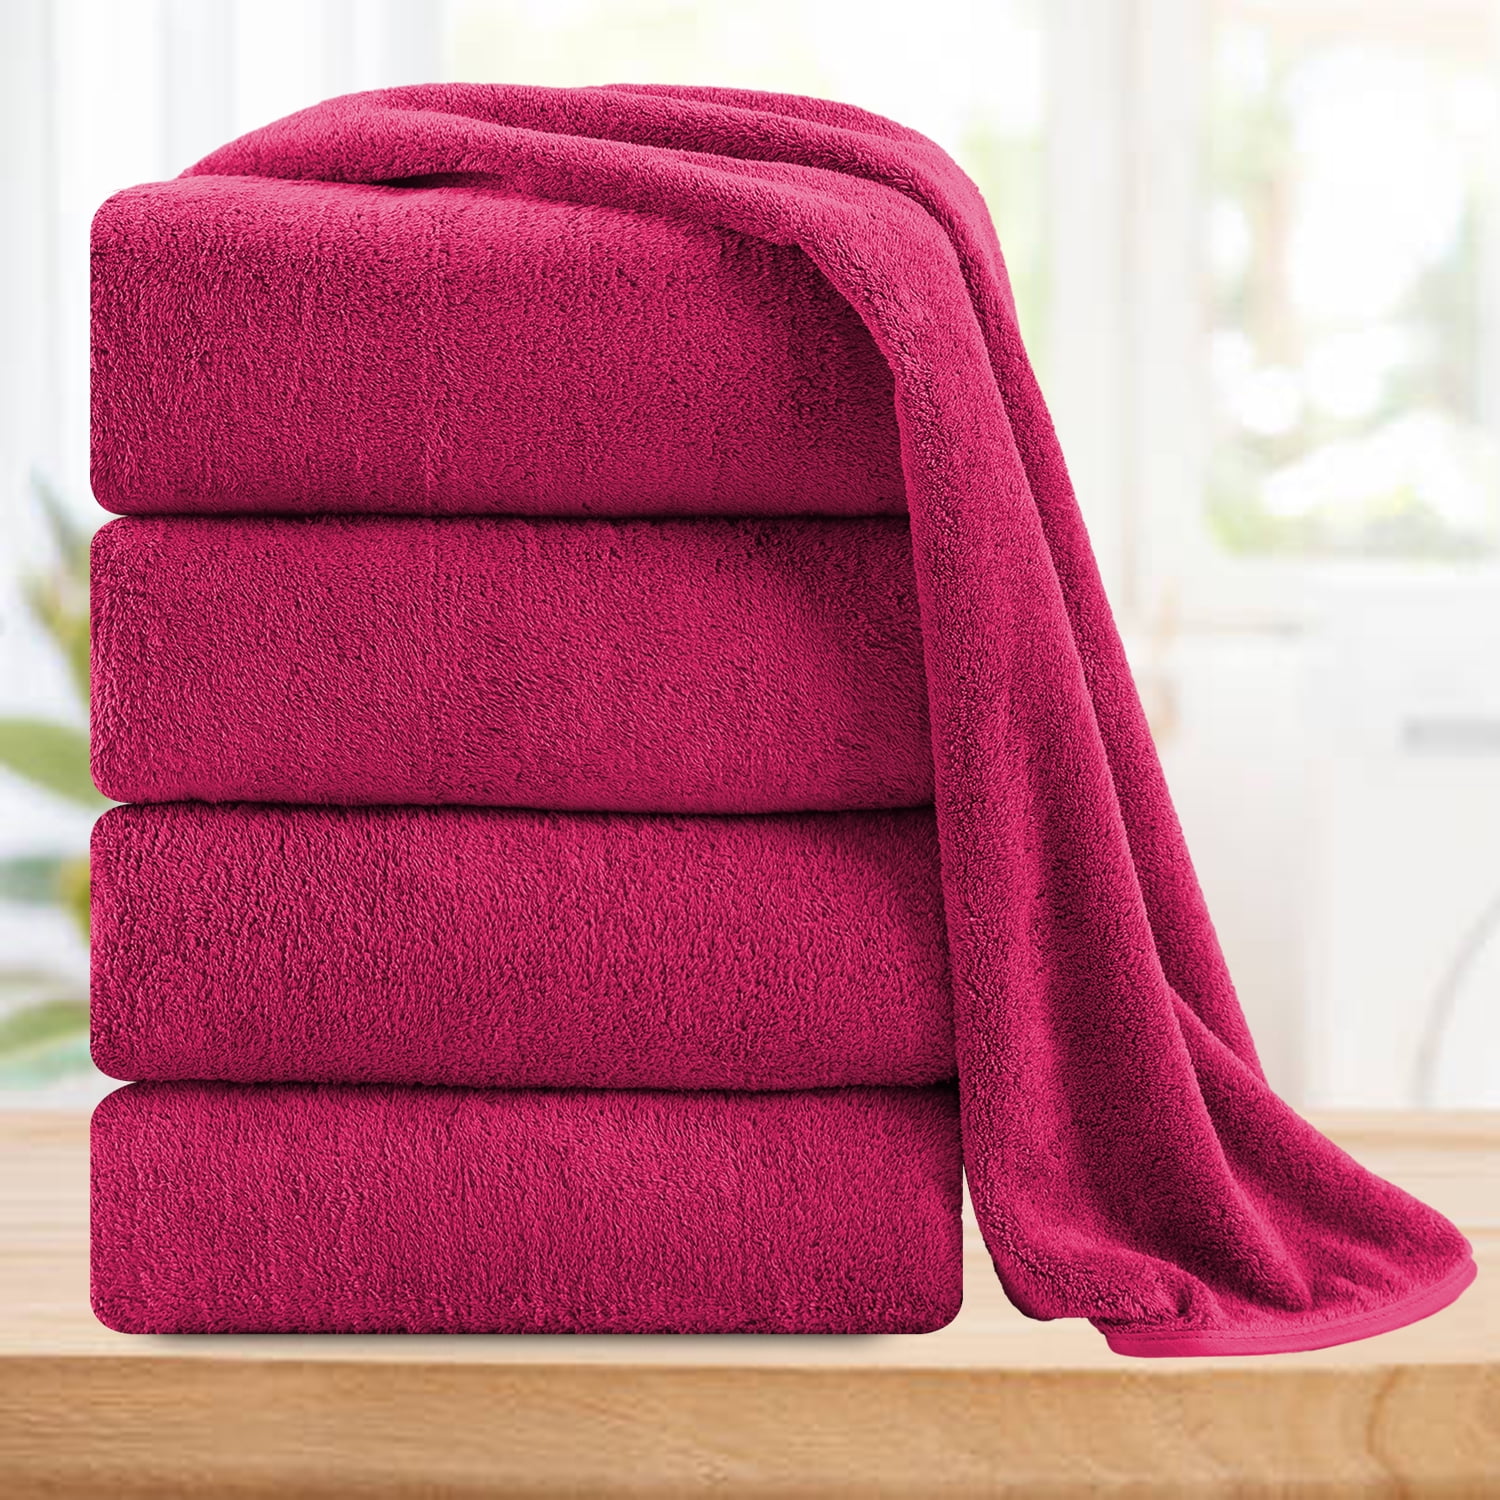 AKTI Premium Cotton Bath Sheets Towels for Adults, 35x70 Inches, Pack of 2,  Super Soft, Extra Absorbent, Hotel & Spa Quality Bath Towels Extra Large,  580 GSM - Red Towels for Bathroom Equestrian Red